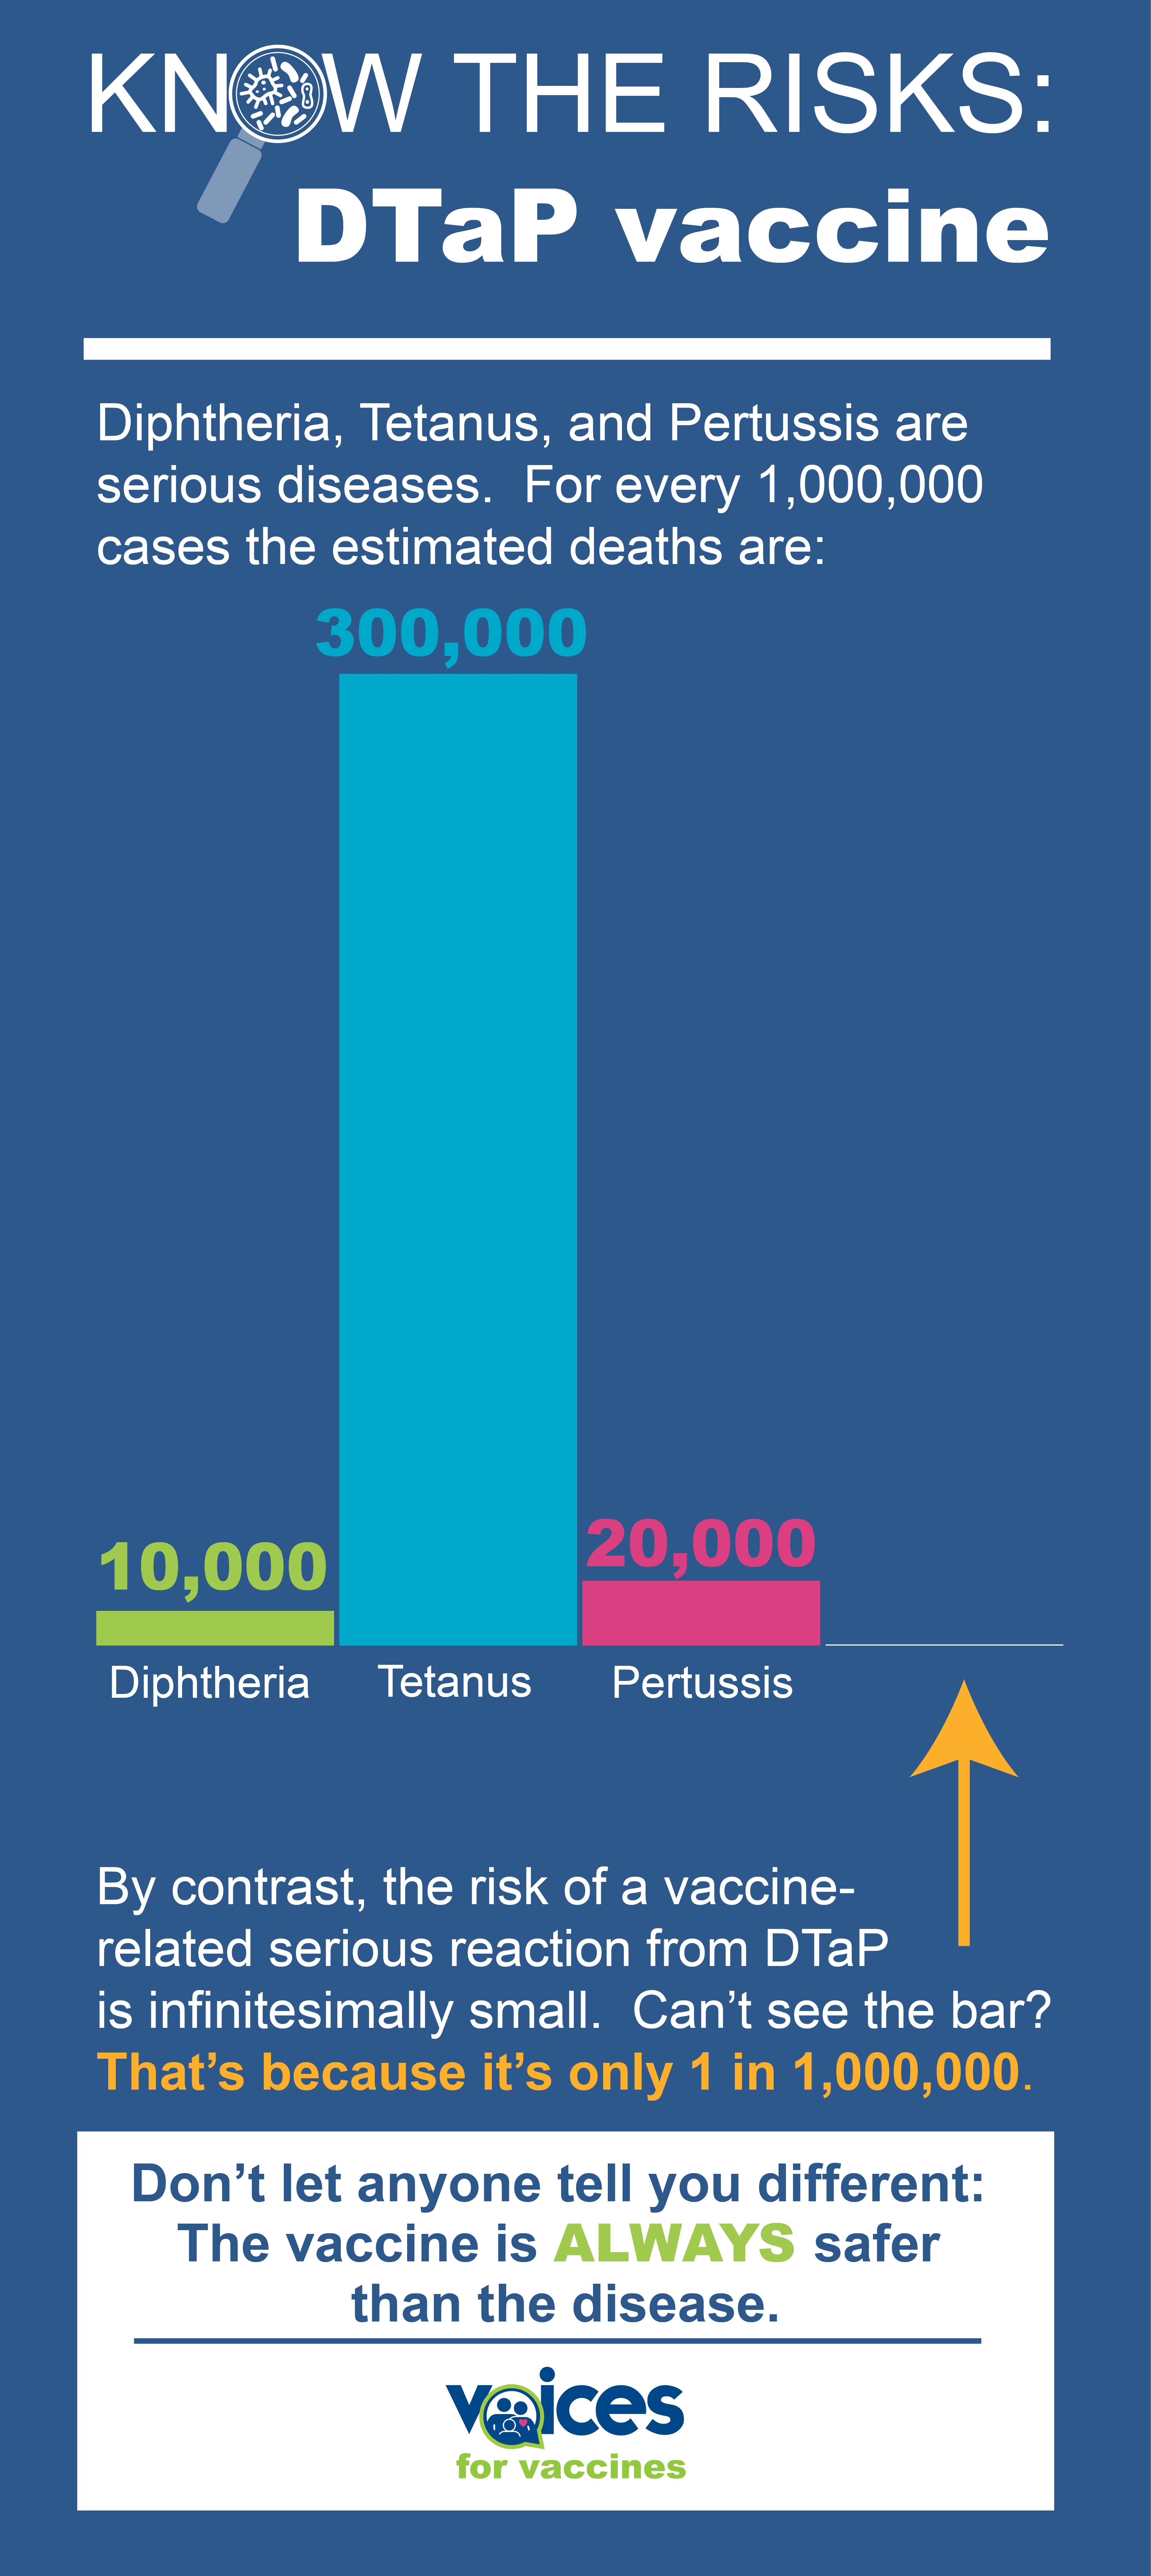 Know the Risks: DTaP vaccine Diphtheria, Tetanus, and Pertussis are serious diseases. For every 1,000,000 cases the estimated deaths are: Image is a bar chart with the following data points: Diphtheria 10,000 Tetanus 300,000 Pertussis 20,000 Vaccine-related reaction from DTap: 1 By contrast, the risk of a vaccine-related serious reaction from DTaP is infinitesimally small. Can’t see the bar? That’s because it’s only 1 in 1,000,000. Don’t let anyone tell you different – the vaccine is always safer than the disease.